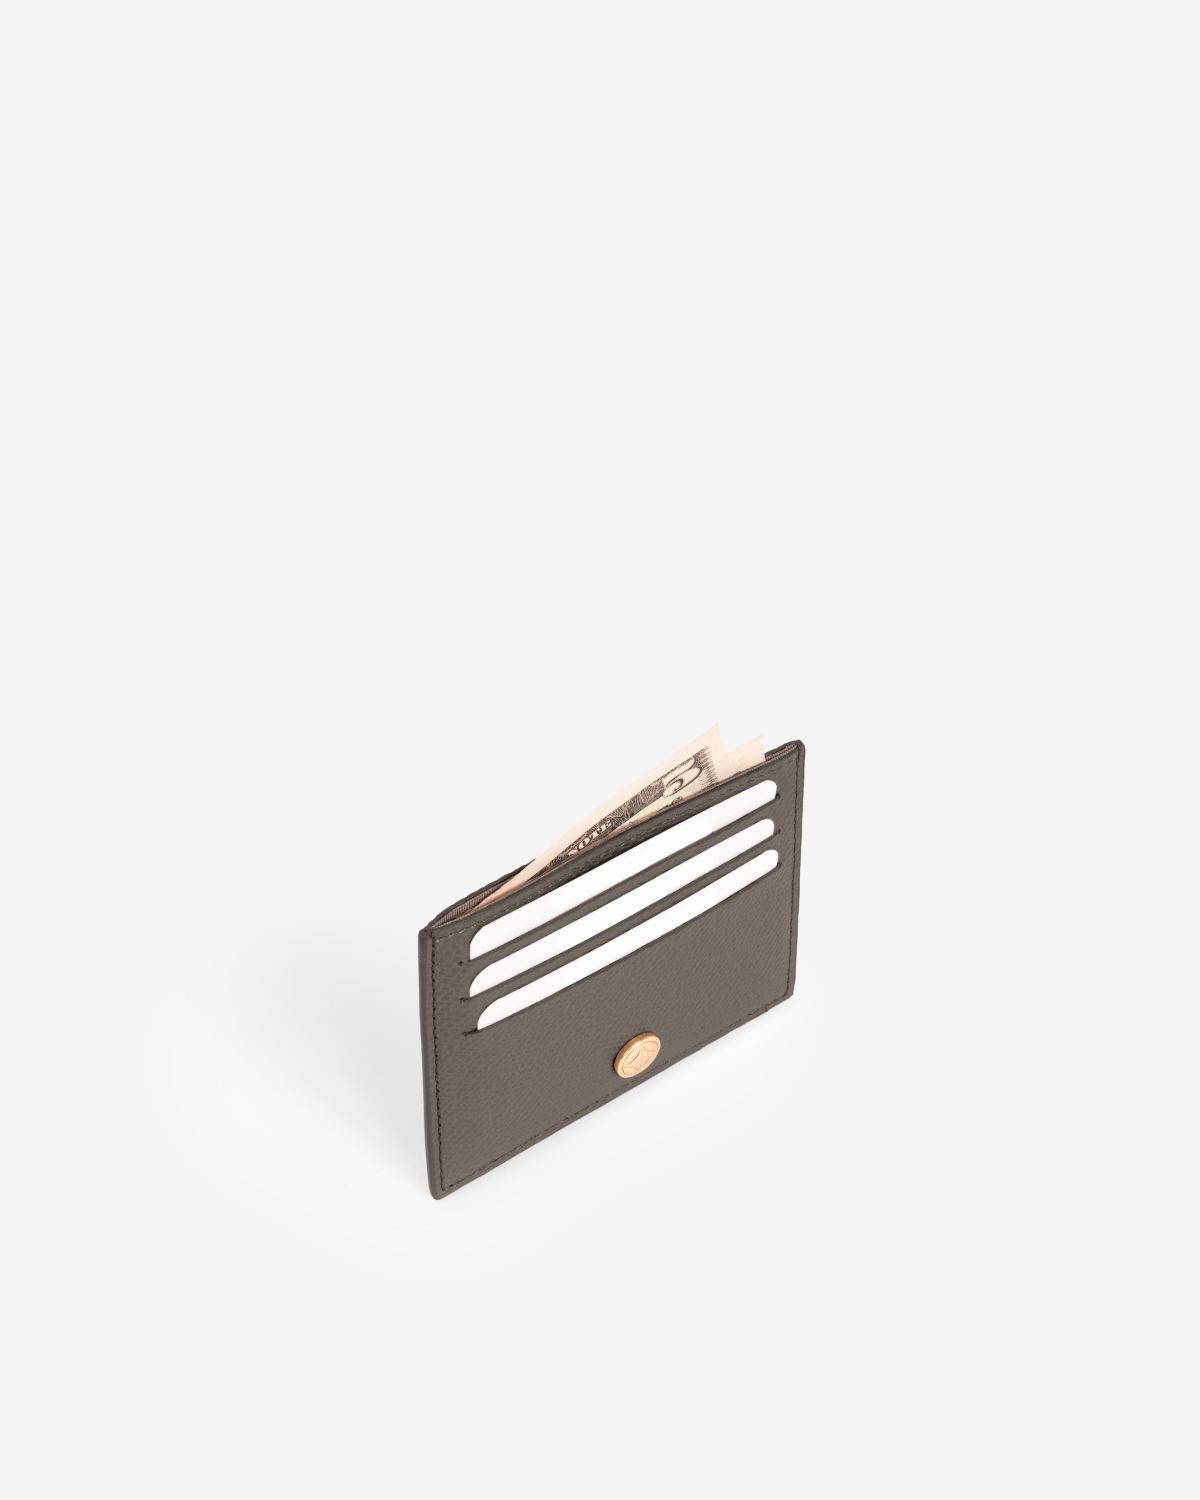 VERA Petite Card Holder in Frosted Gray